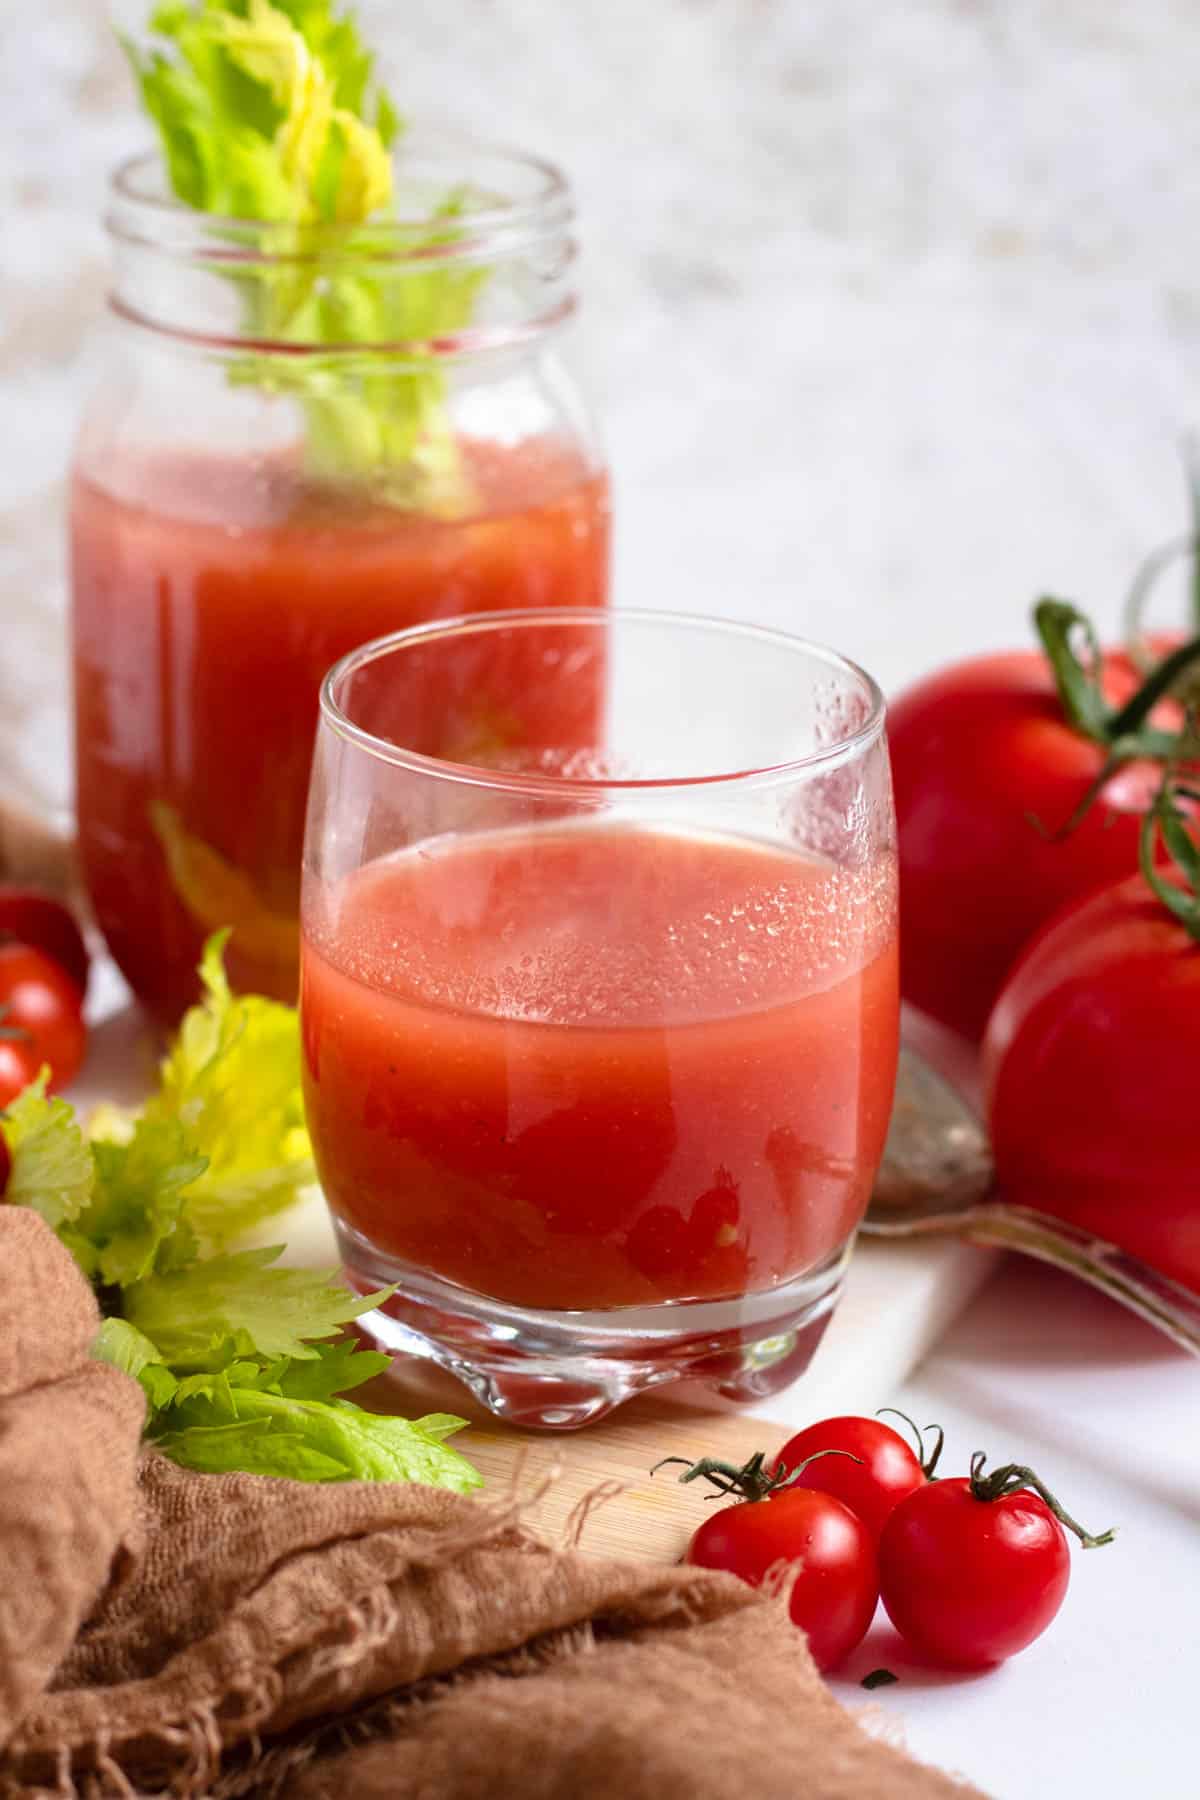 tomato juice in a small glass with a light colored background